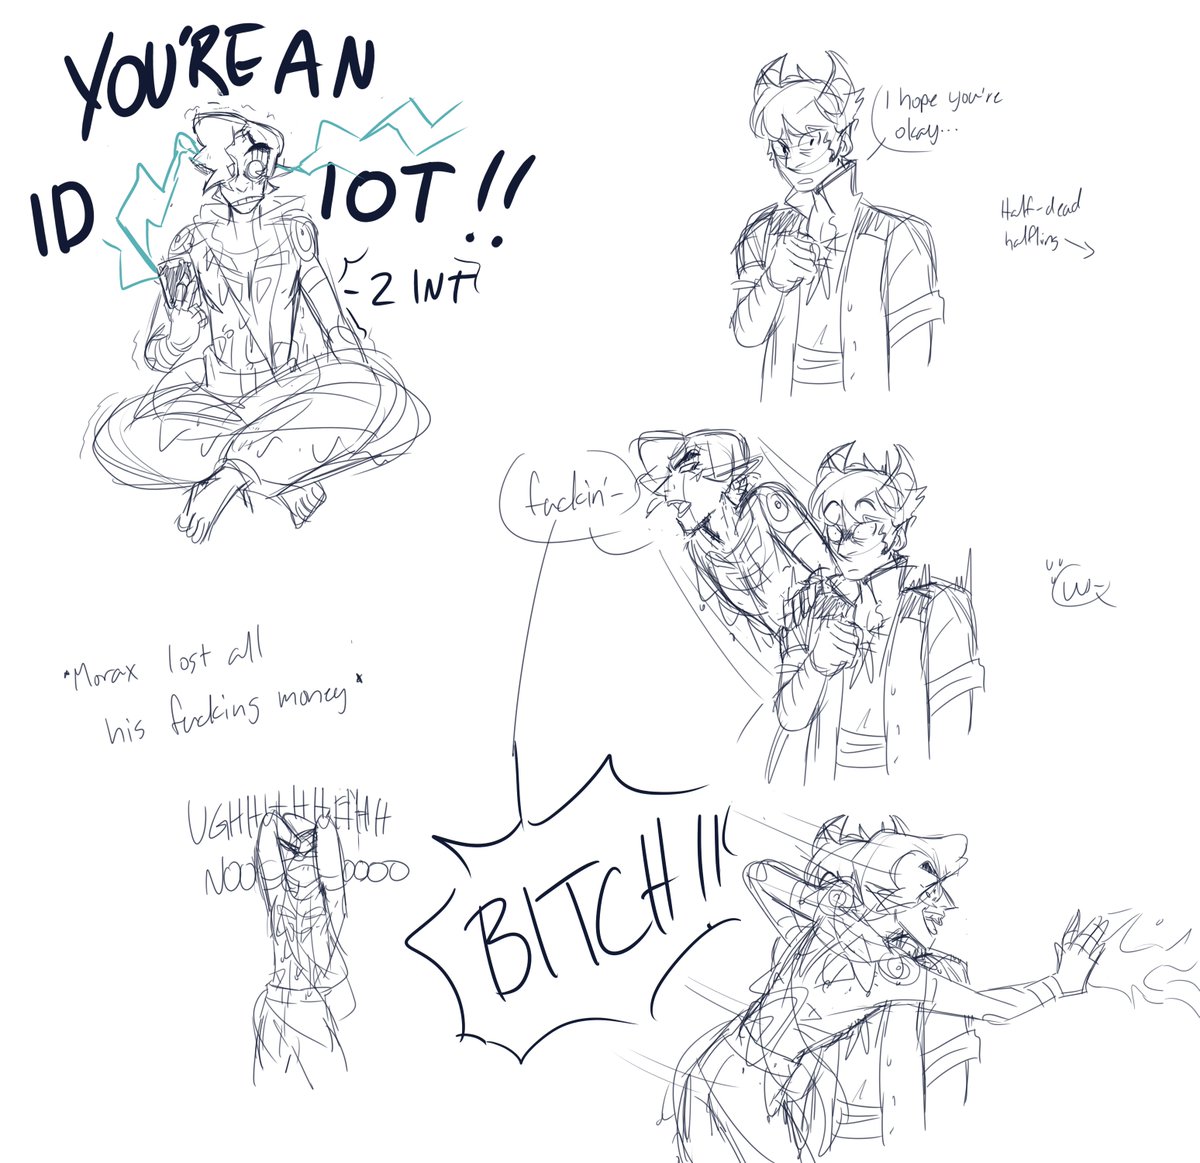 some doodles of stuff that's happened in sessions 